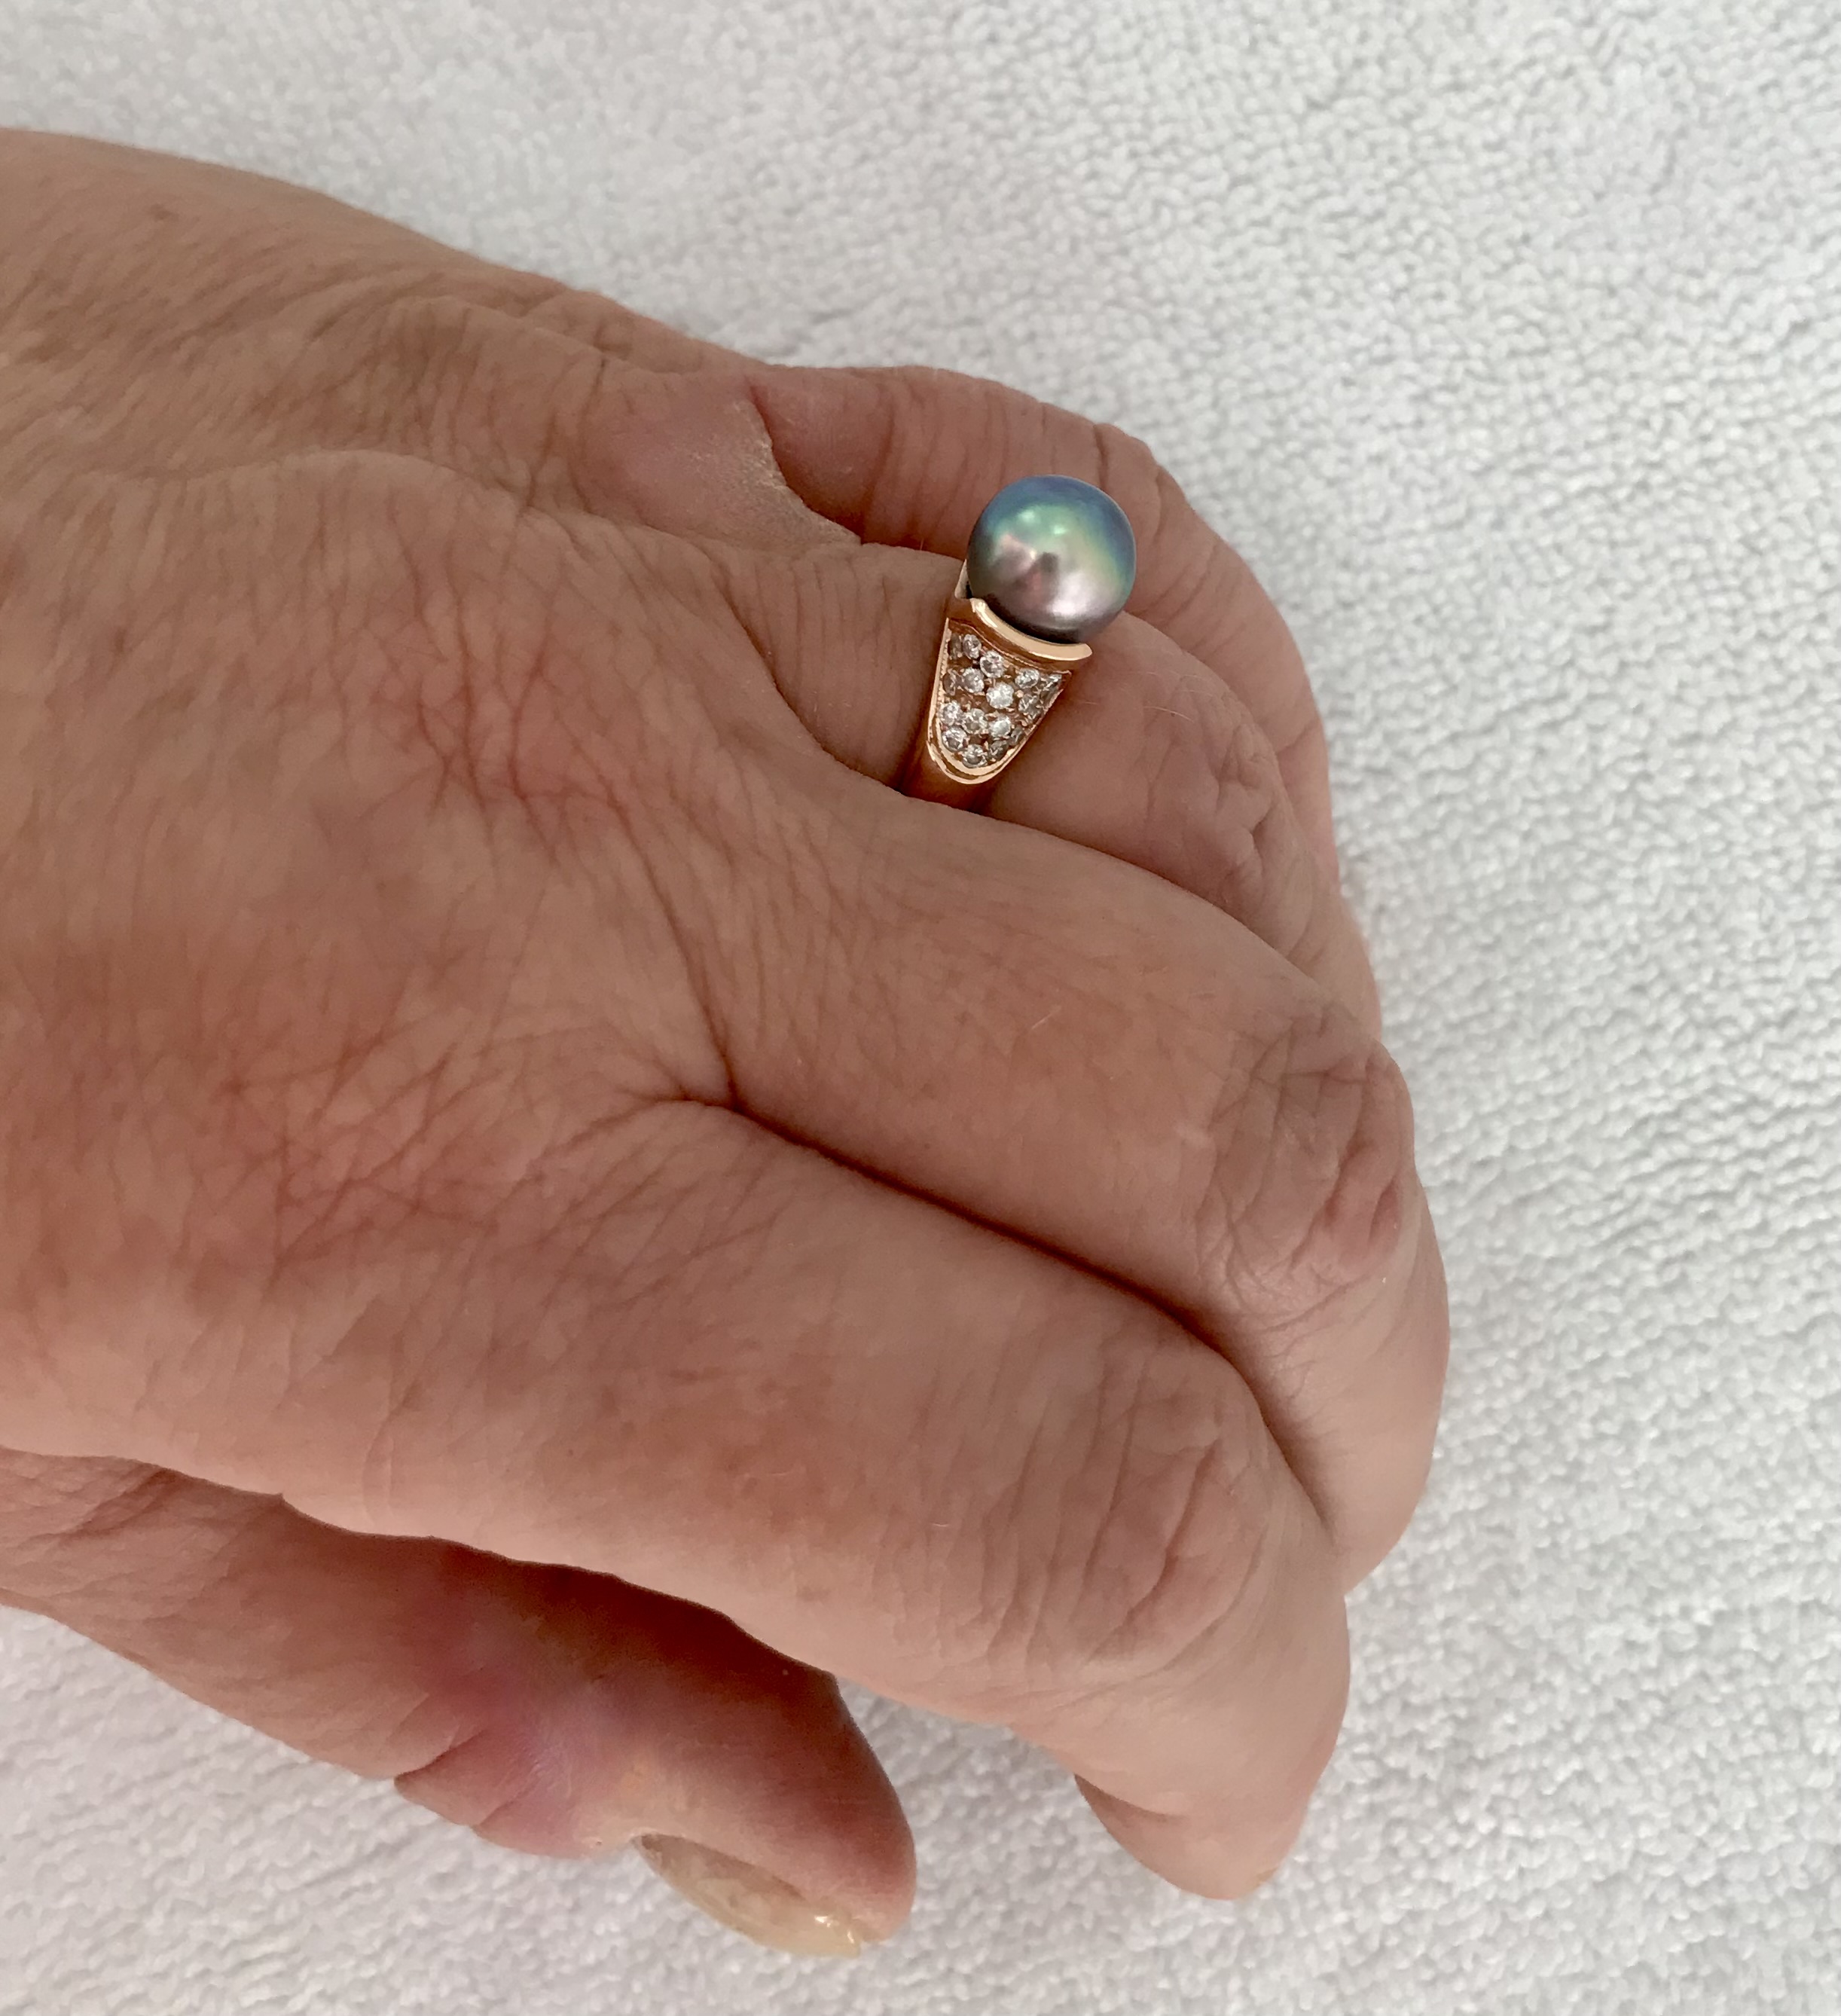 Sea of Cortez pearl from Douglas in the Pearl Paradise rose gold ring setting